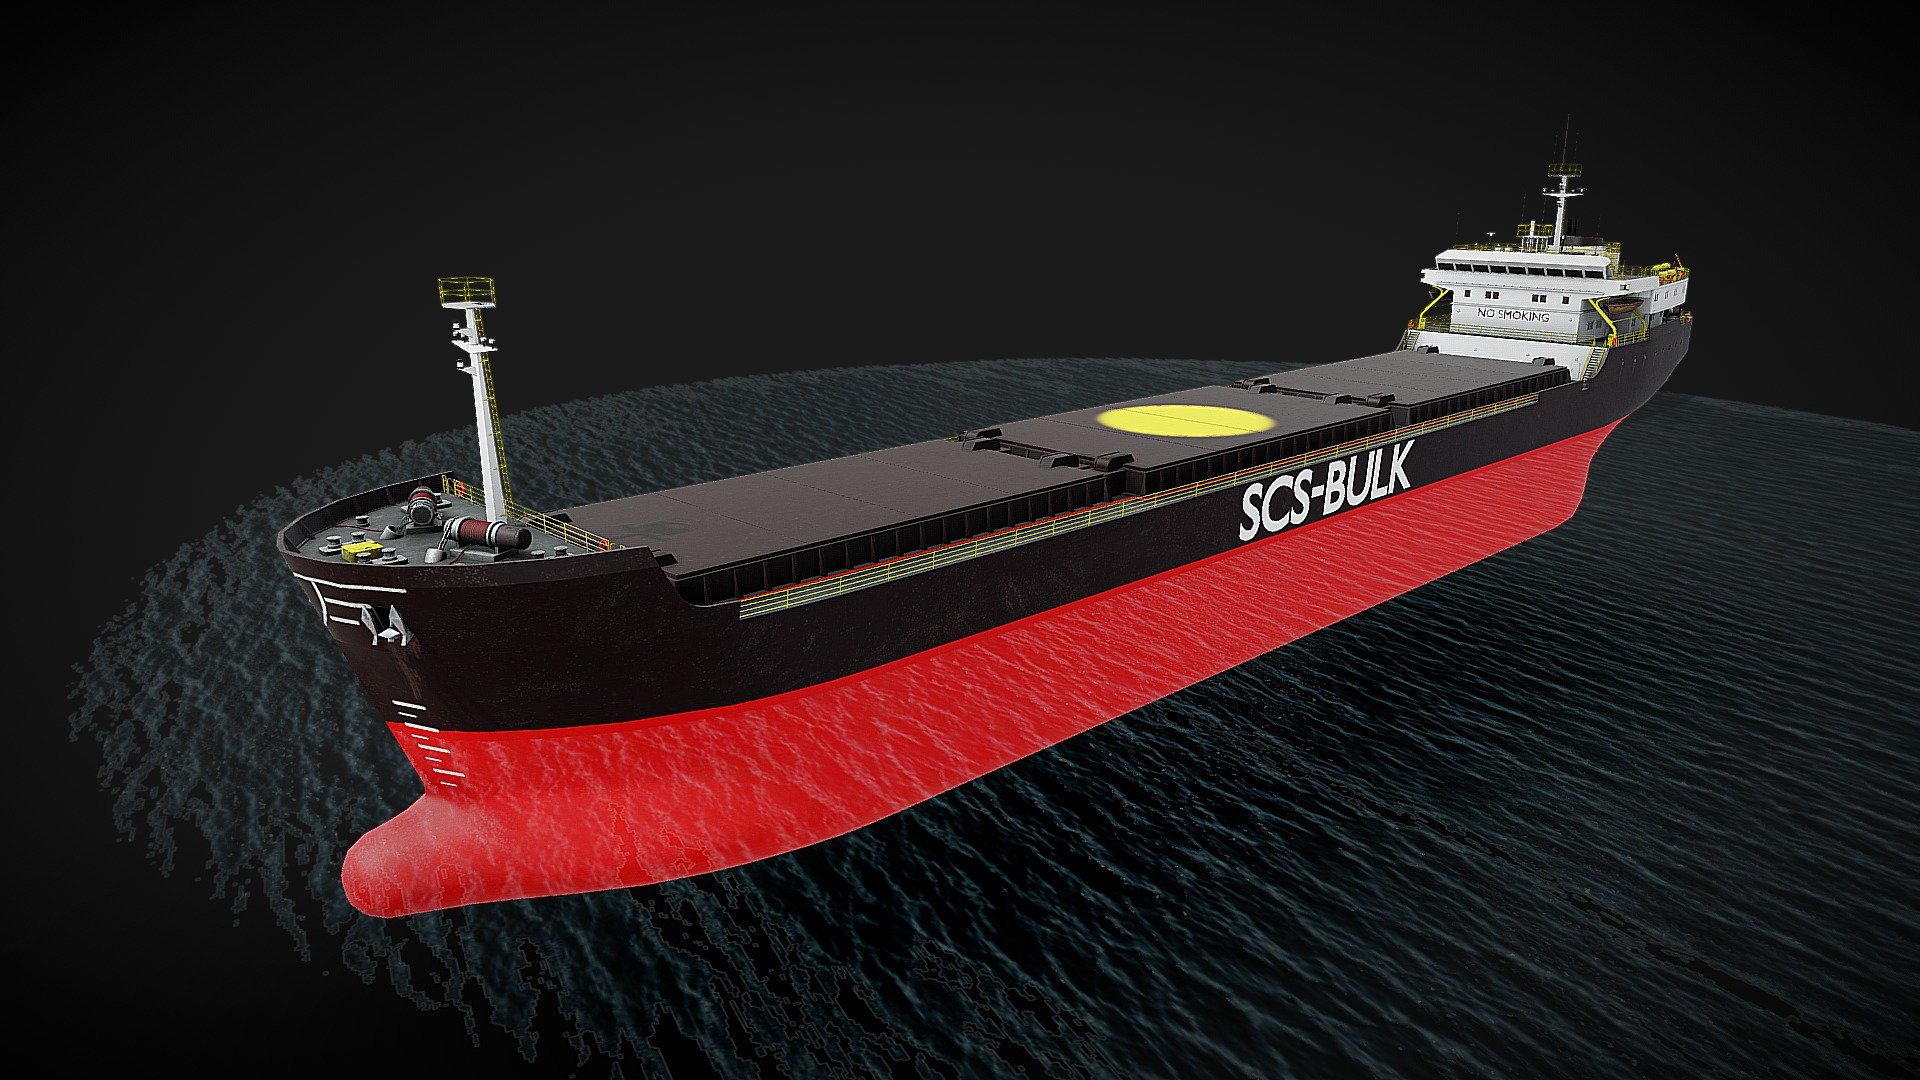 Game ready model bulker. Model scale Unity engine. The model has separated cargo compartment covers to create animations if necessary for your project 3d model